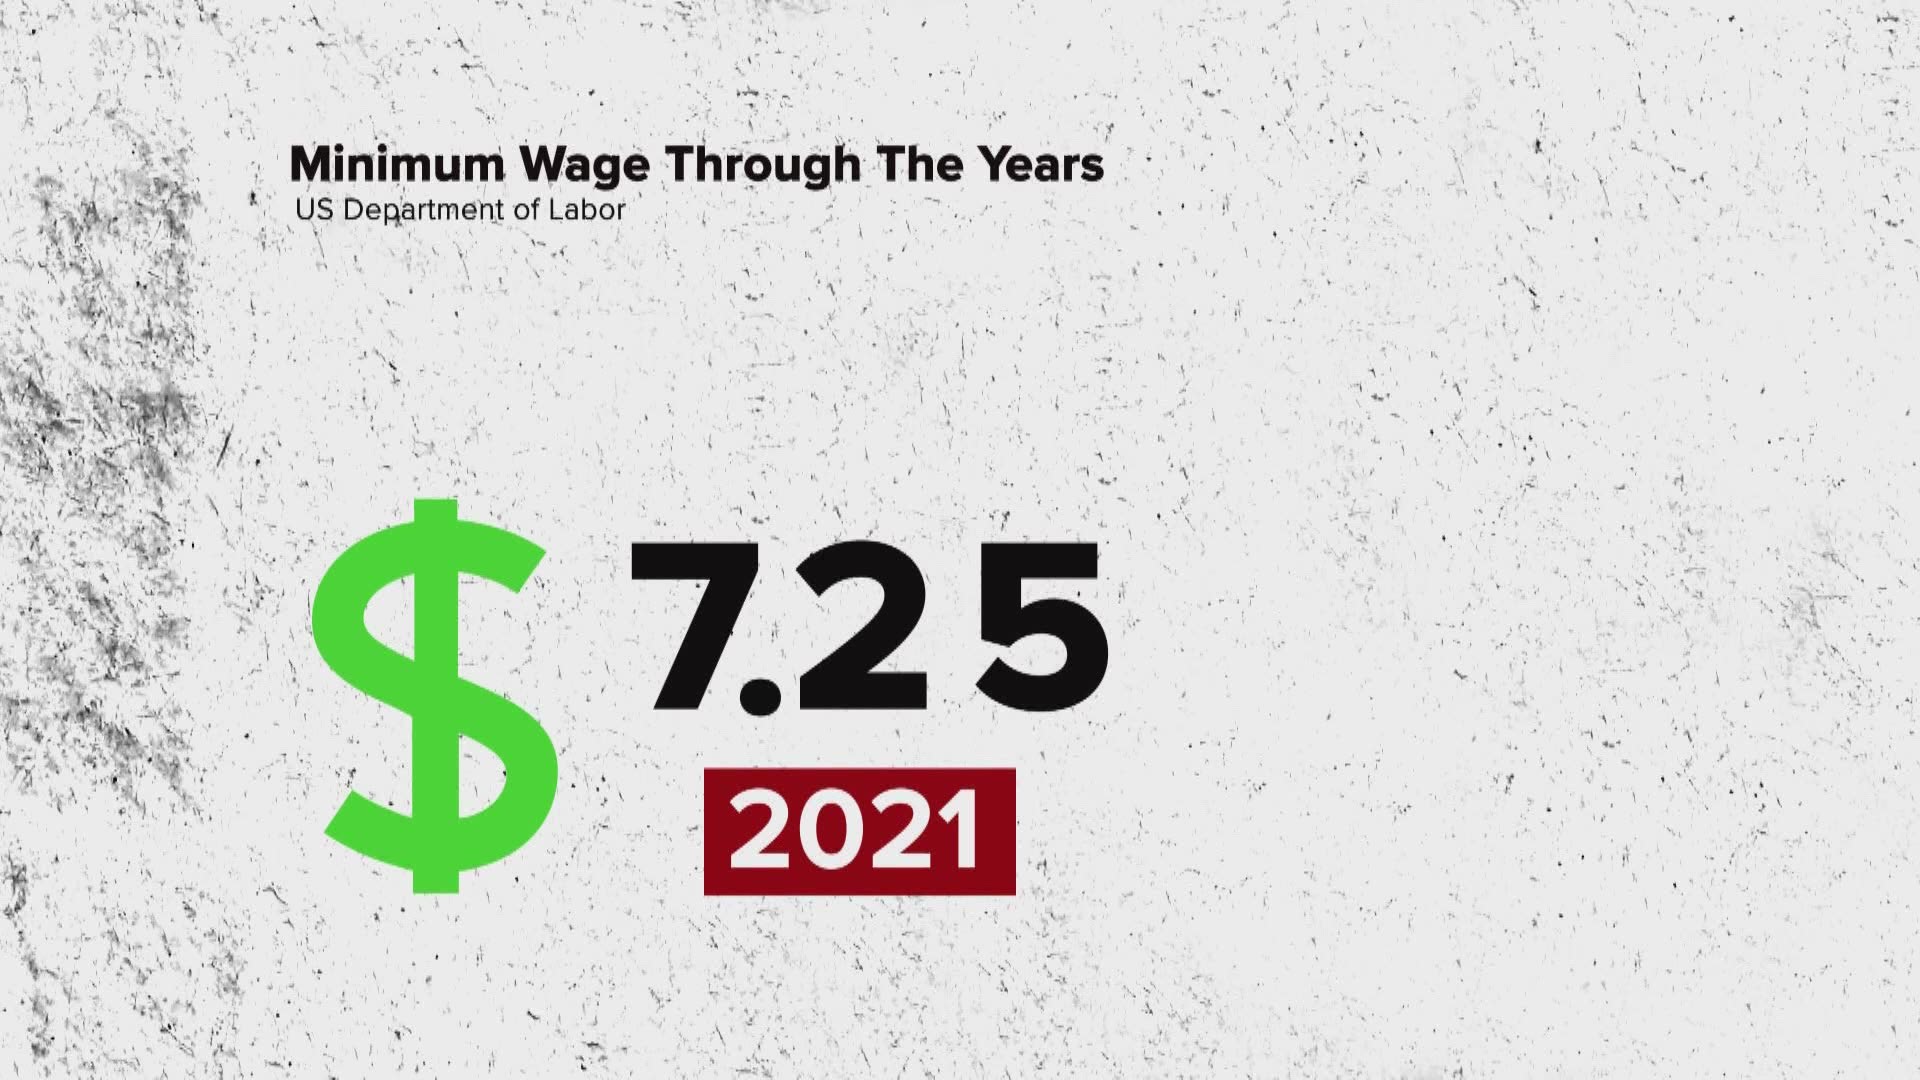 It's been twelve years since there has been a raise in the federal minimum wage, which is $7.25 an hour. Some in Congress want to raise it to $15.